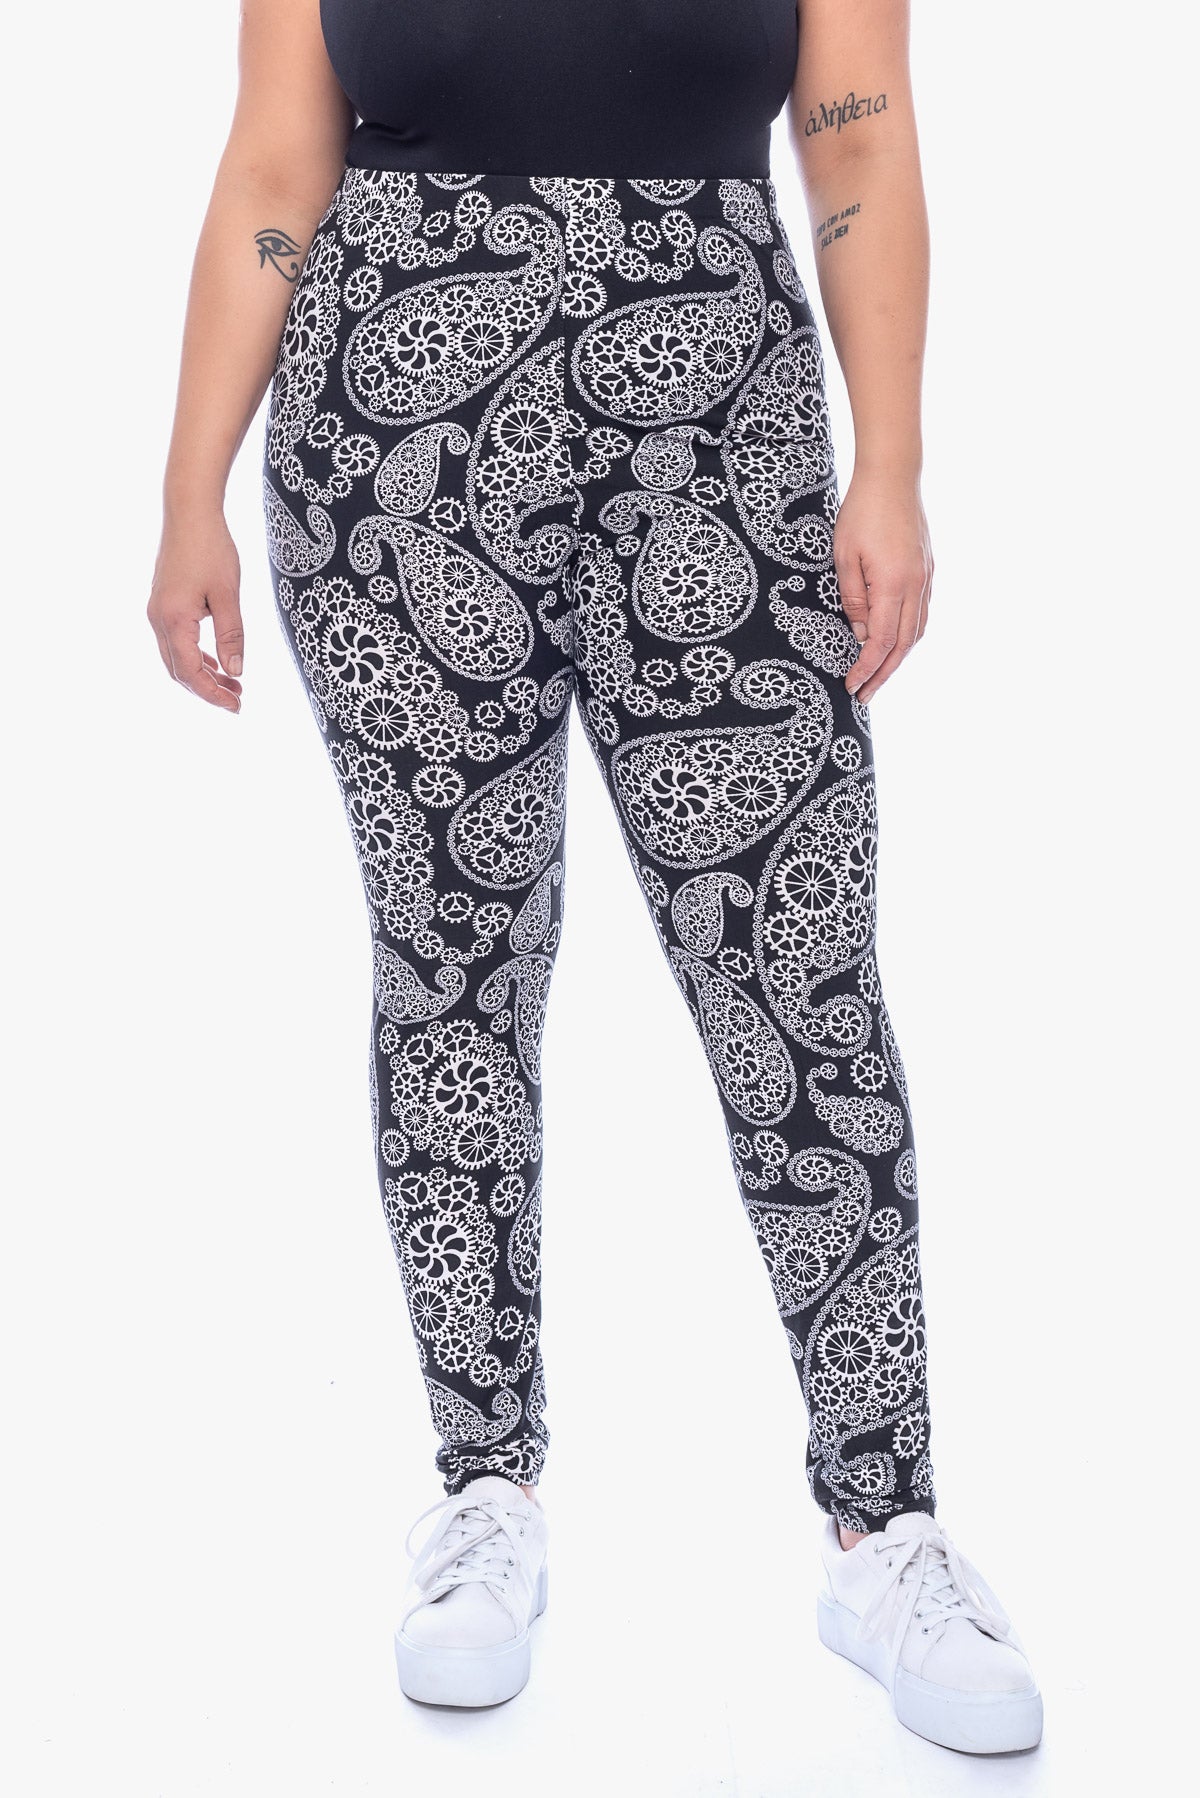 LILLY cogs printed leggings